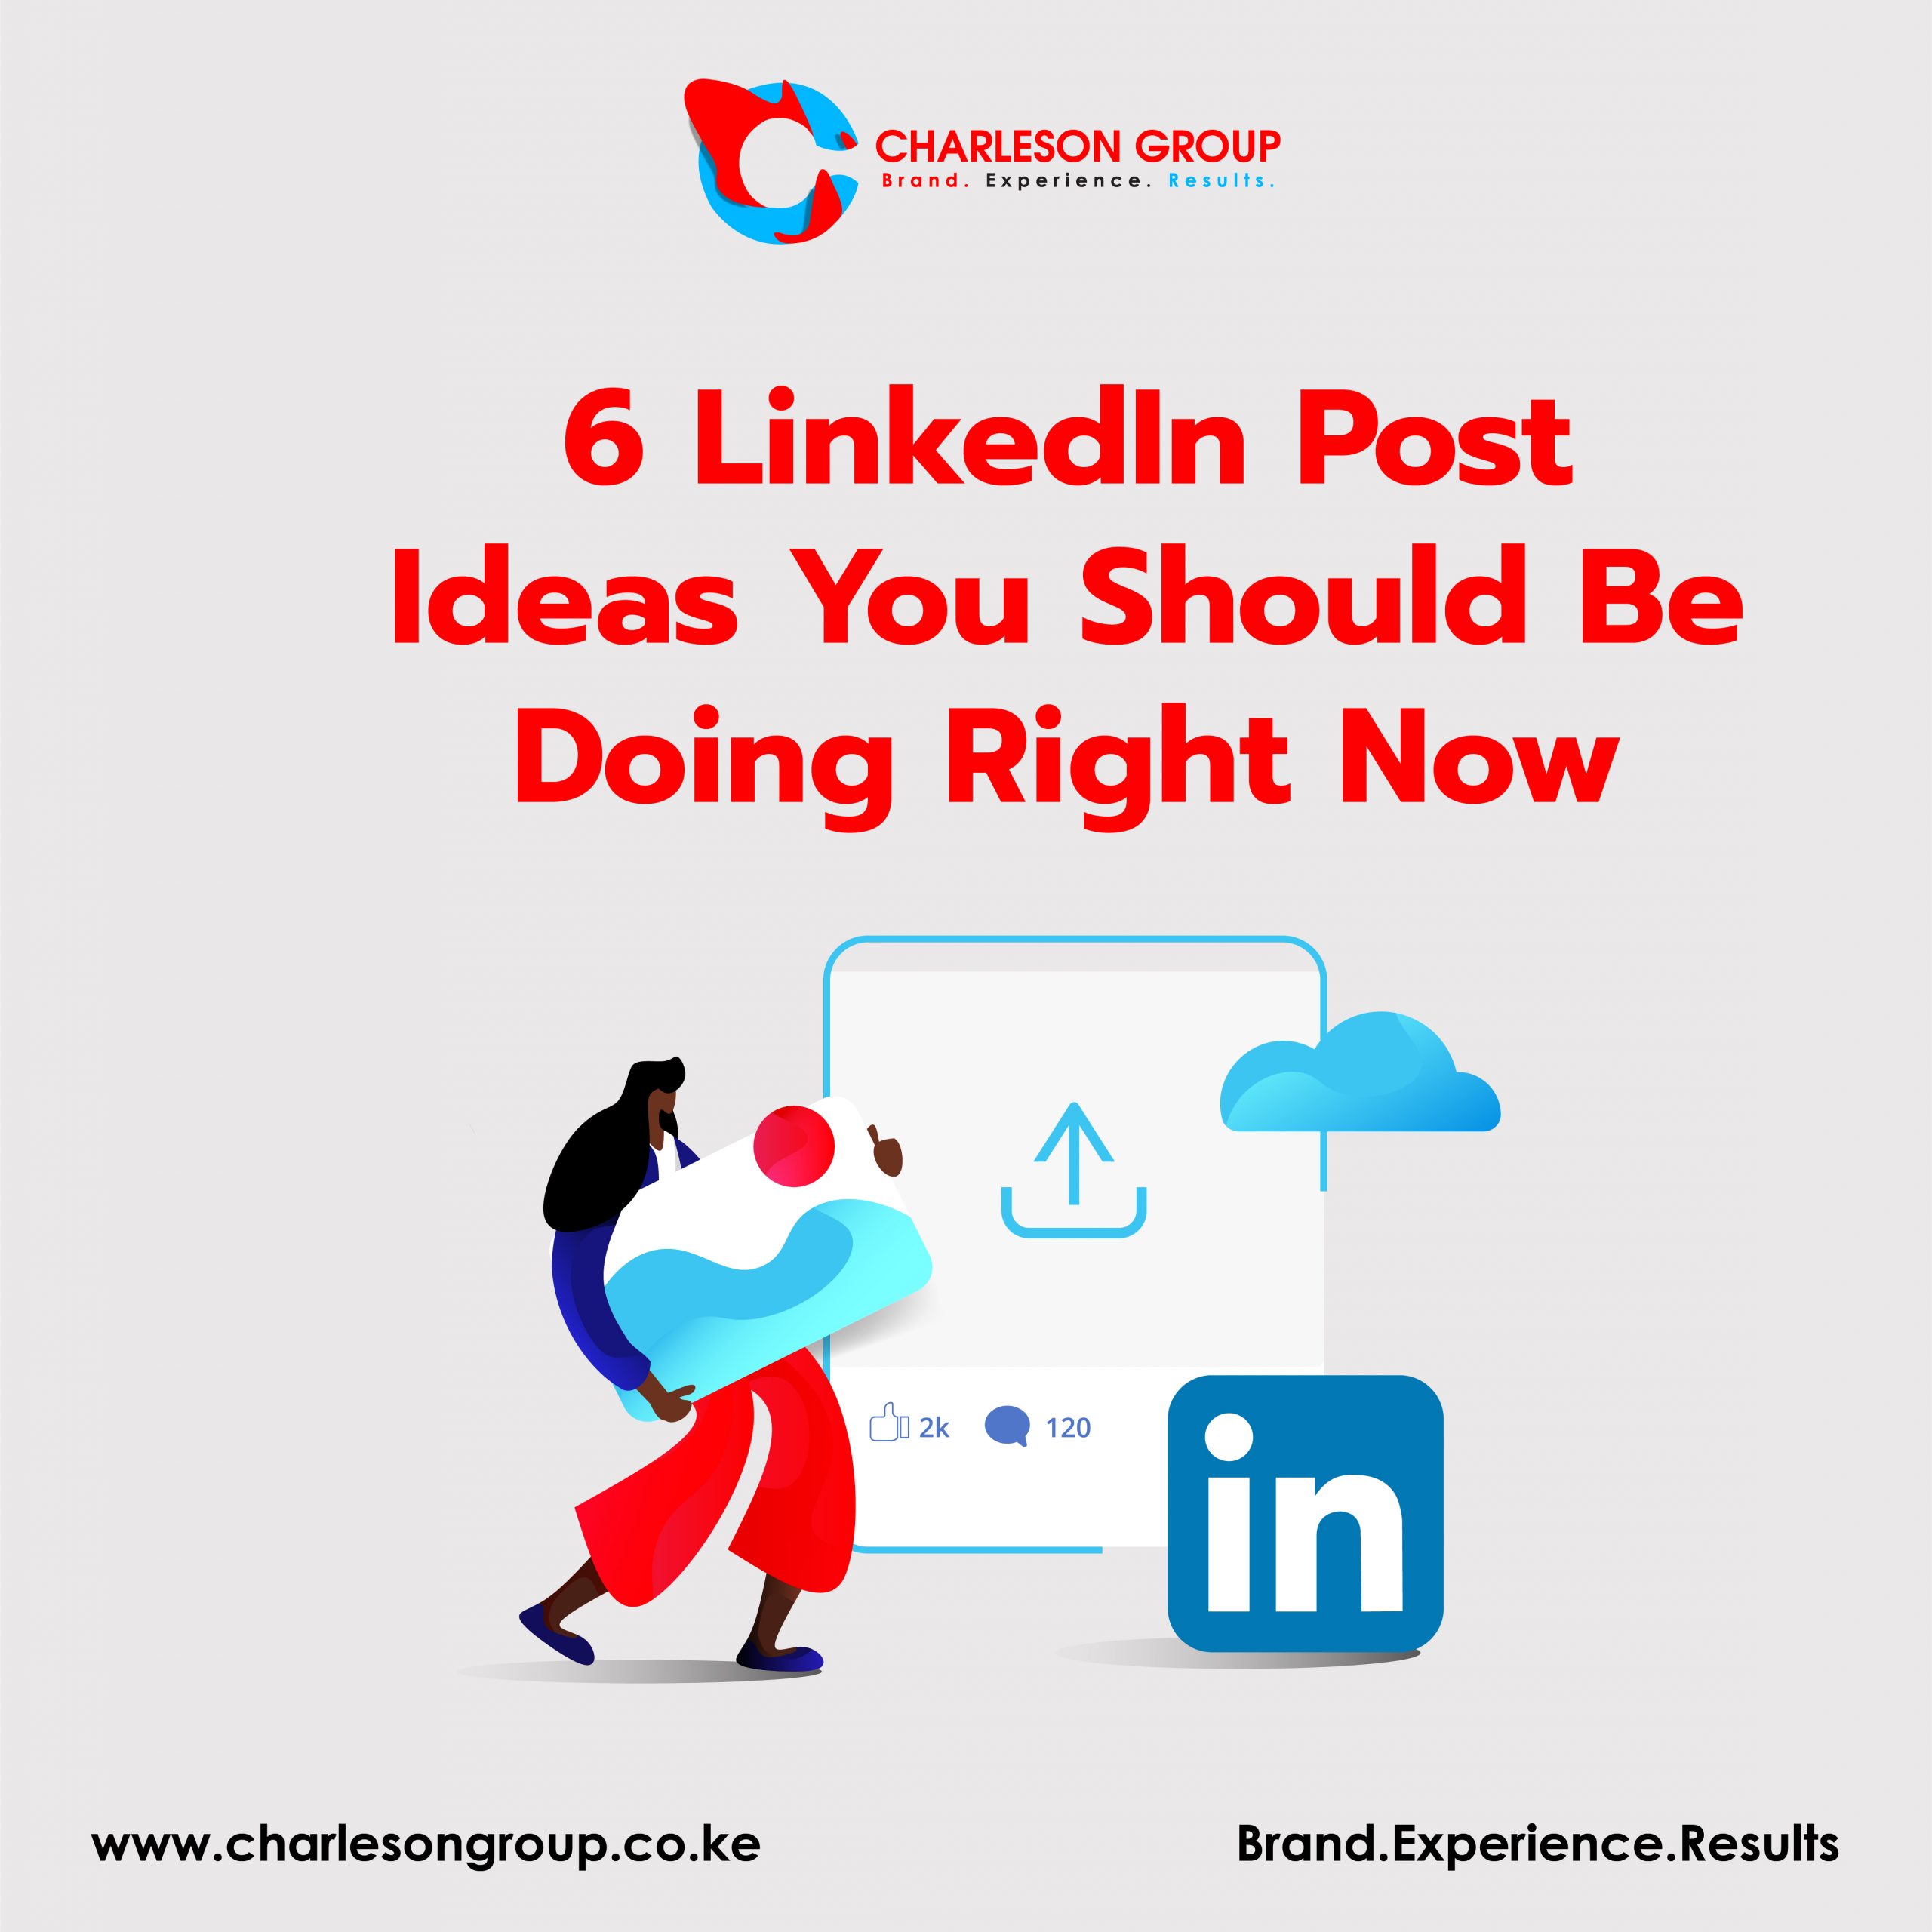 6 LinkedIn Post Ideas You Should Be Doing Right Now